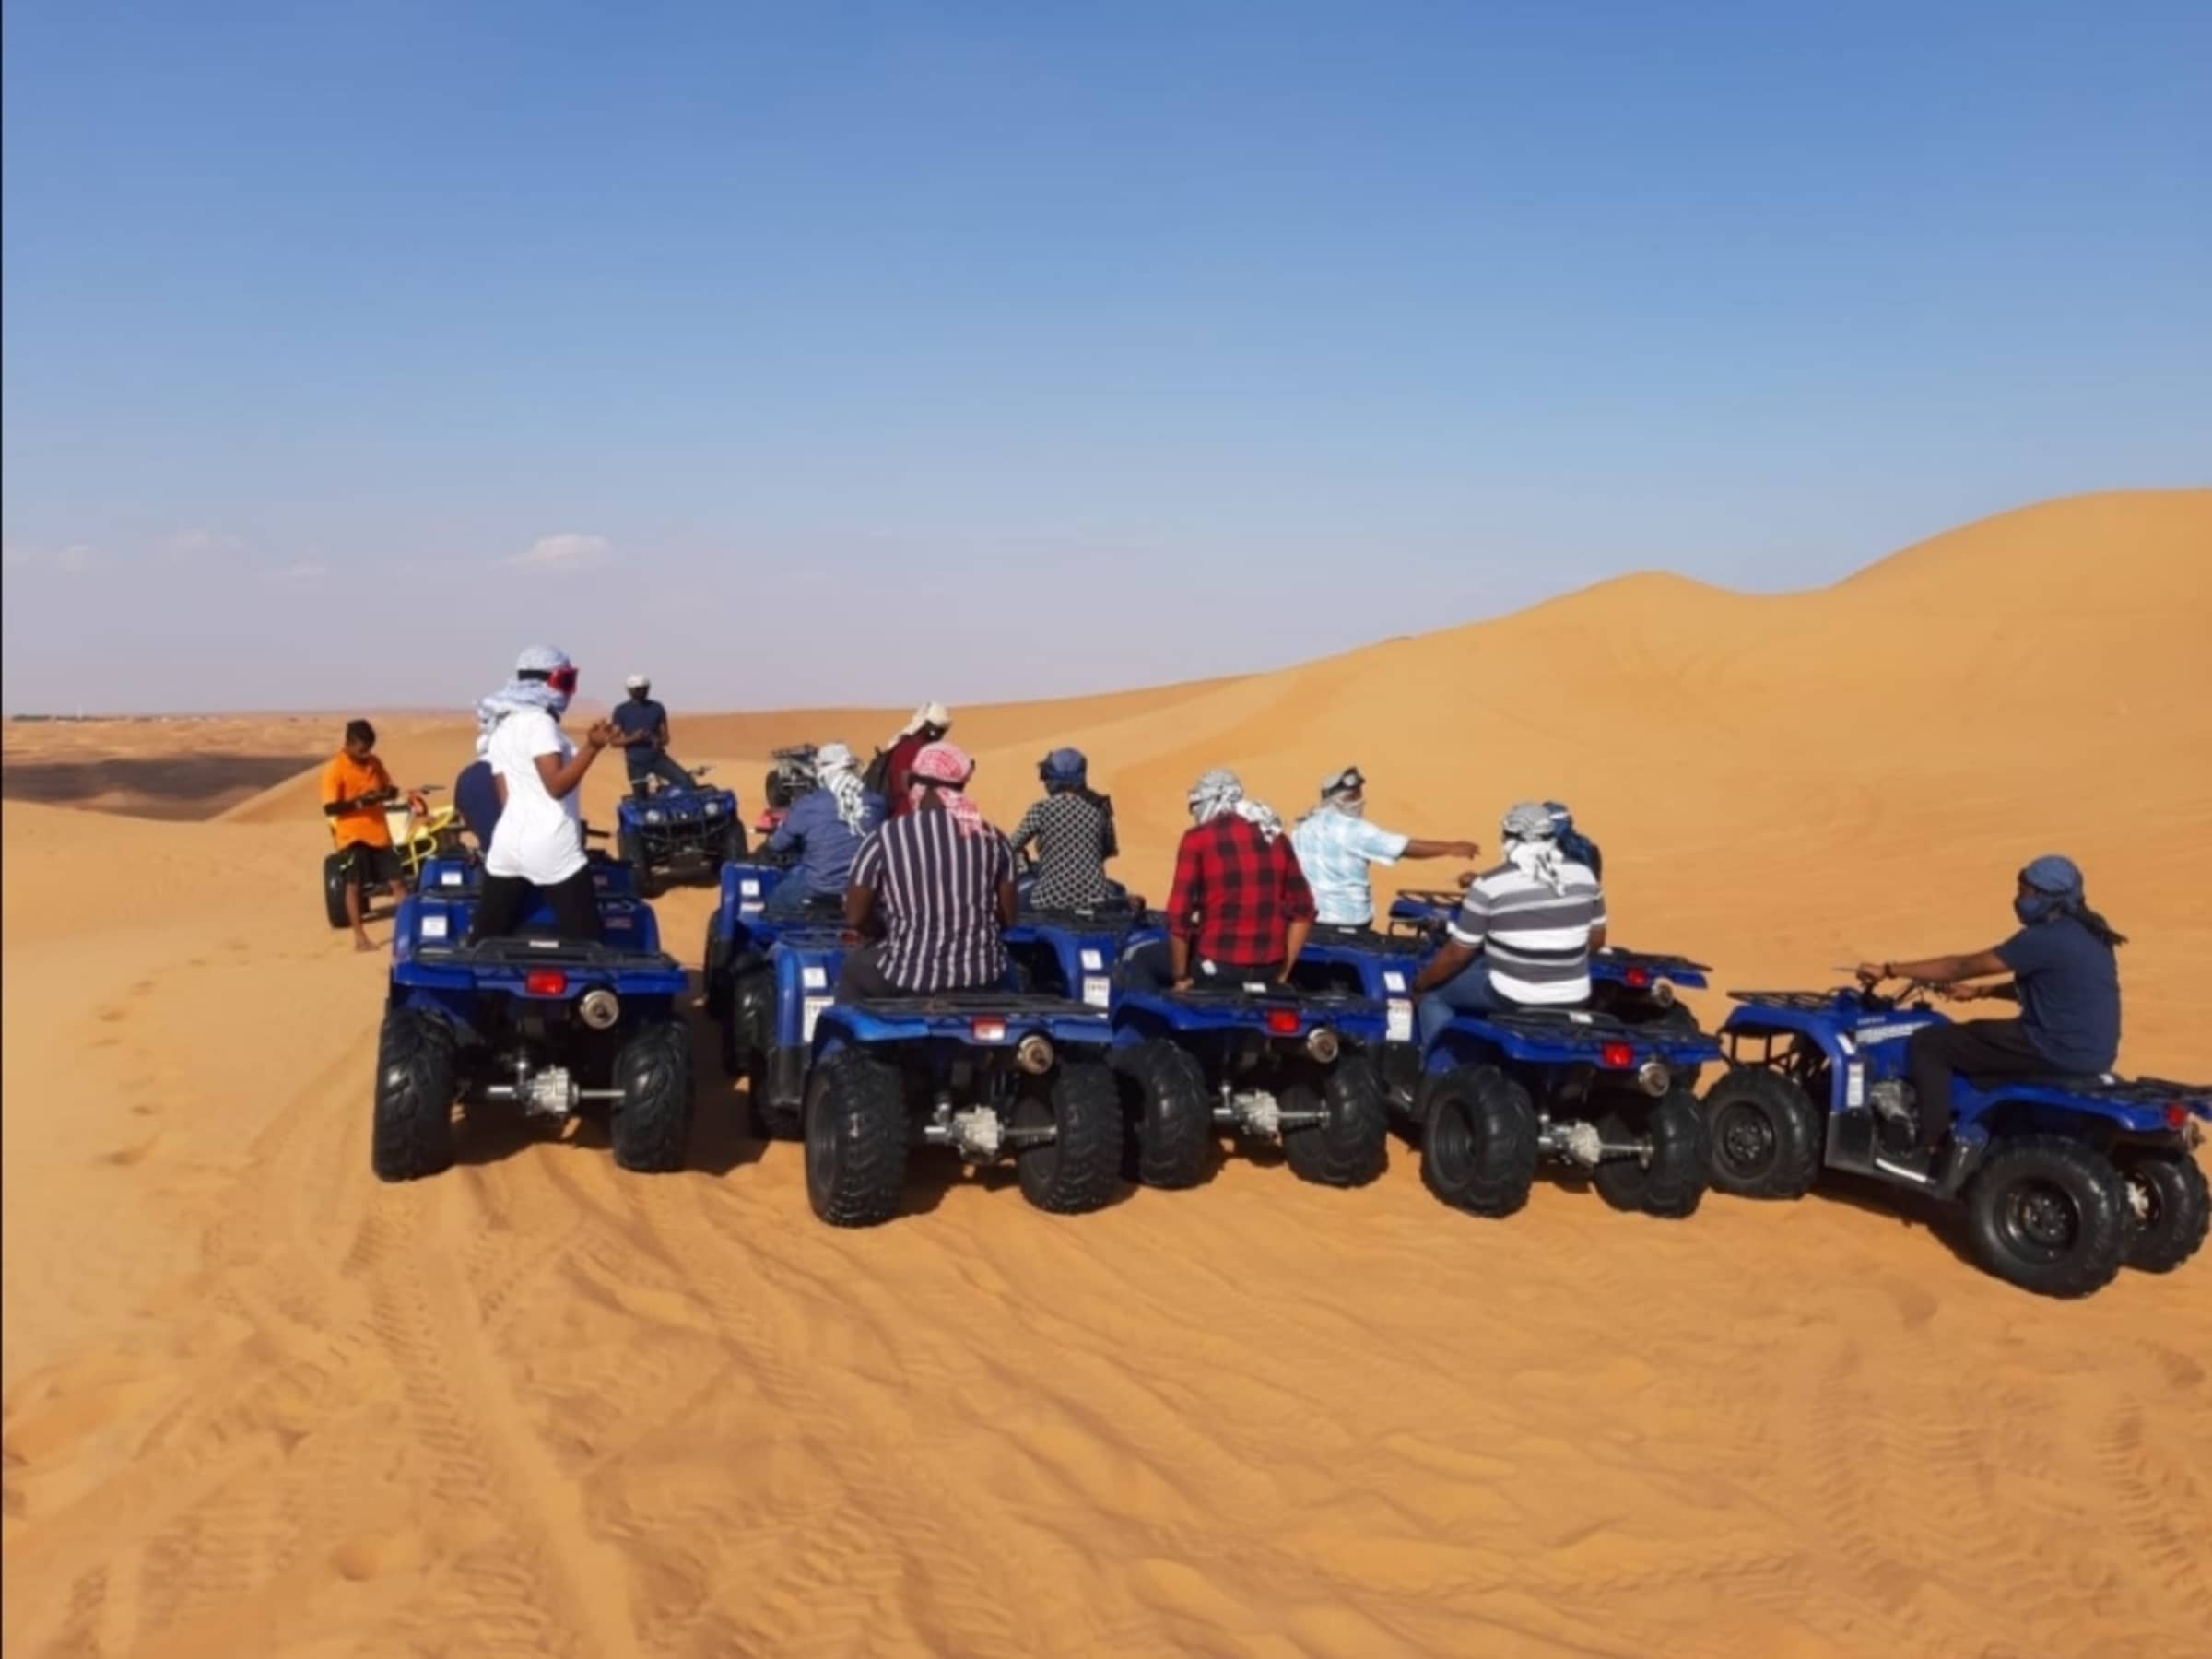 You are currently viewing Easy Way for Quad Bike Rental Dubai for Crazy Quad Bike Racing